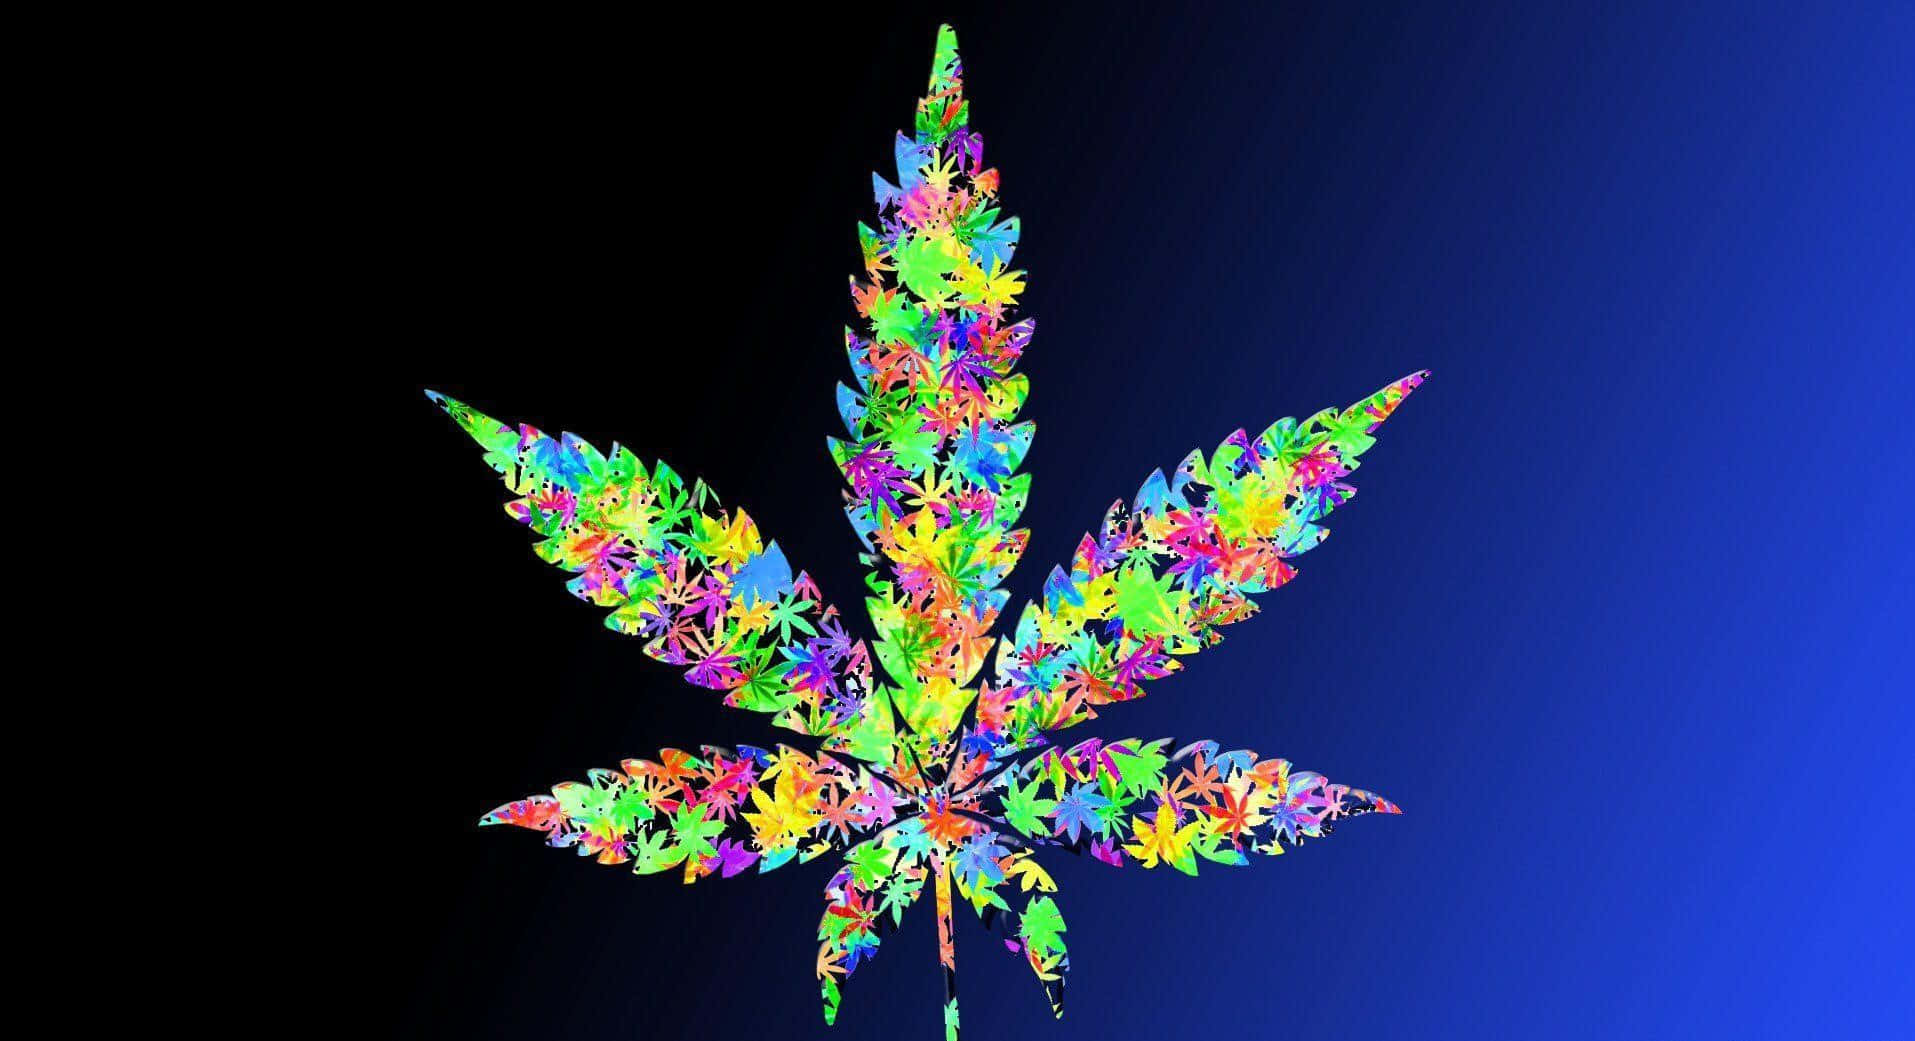 psychedelic weed wallpaper